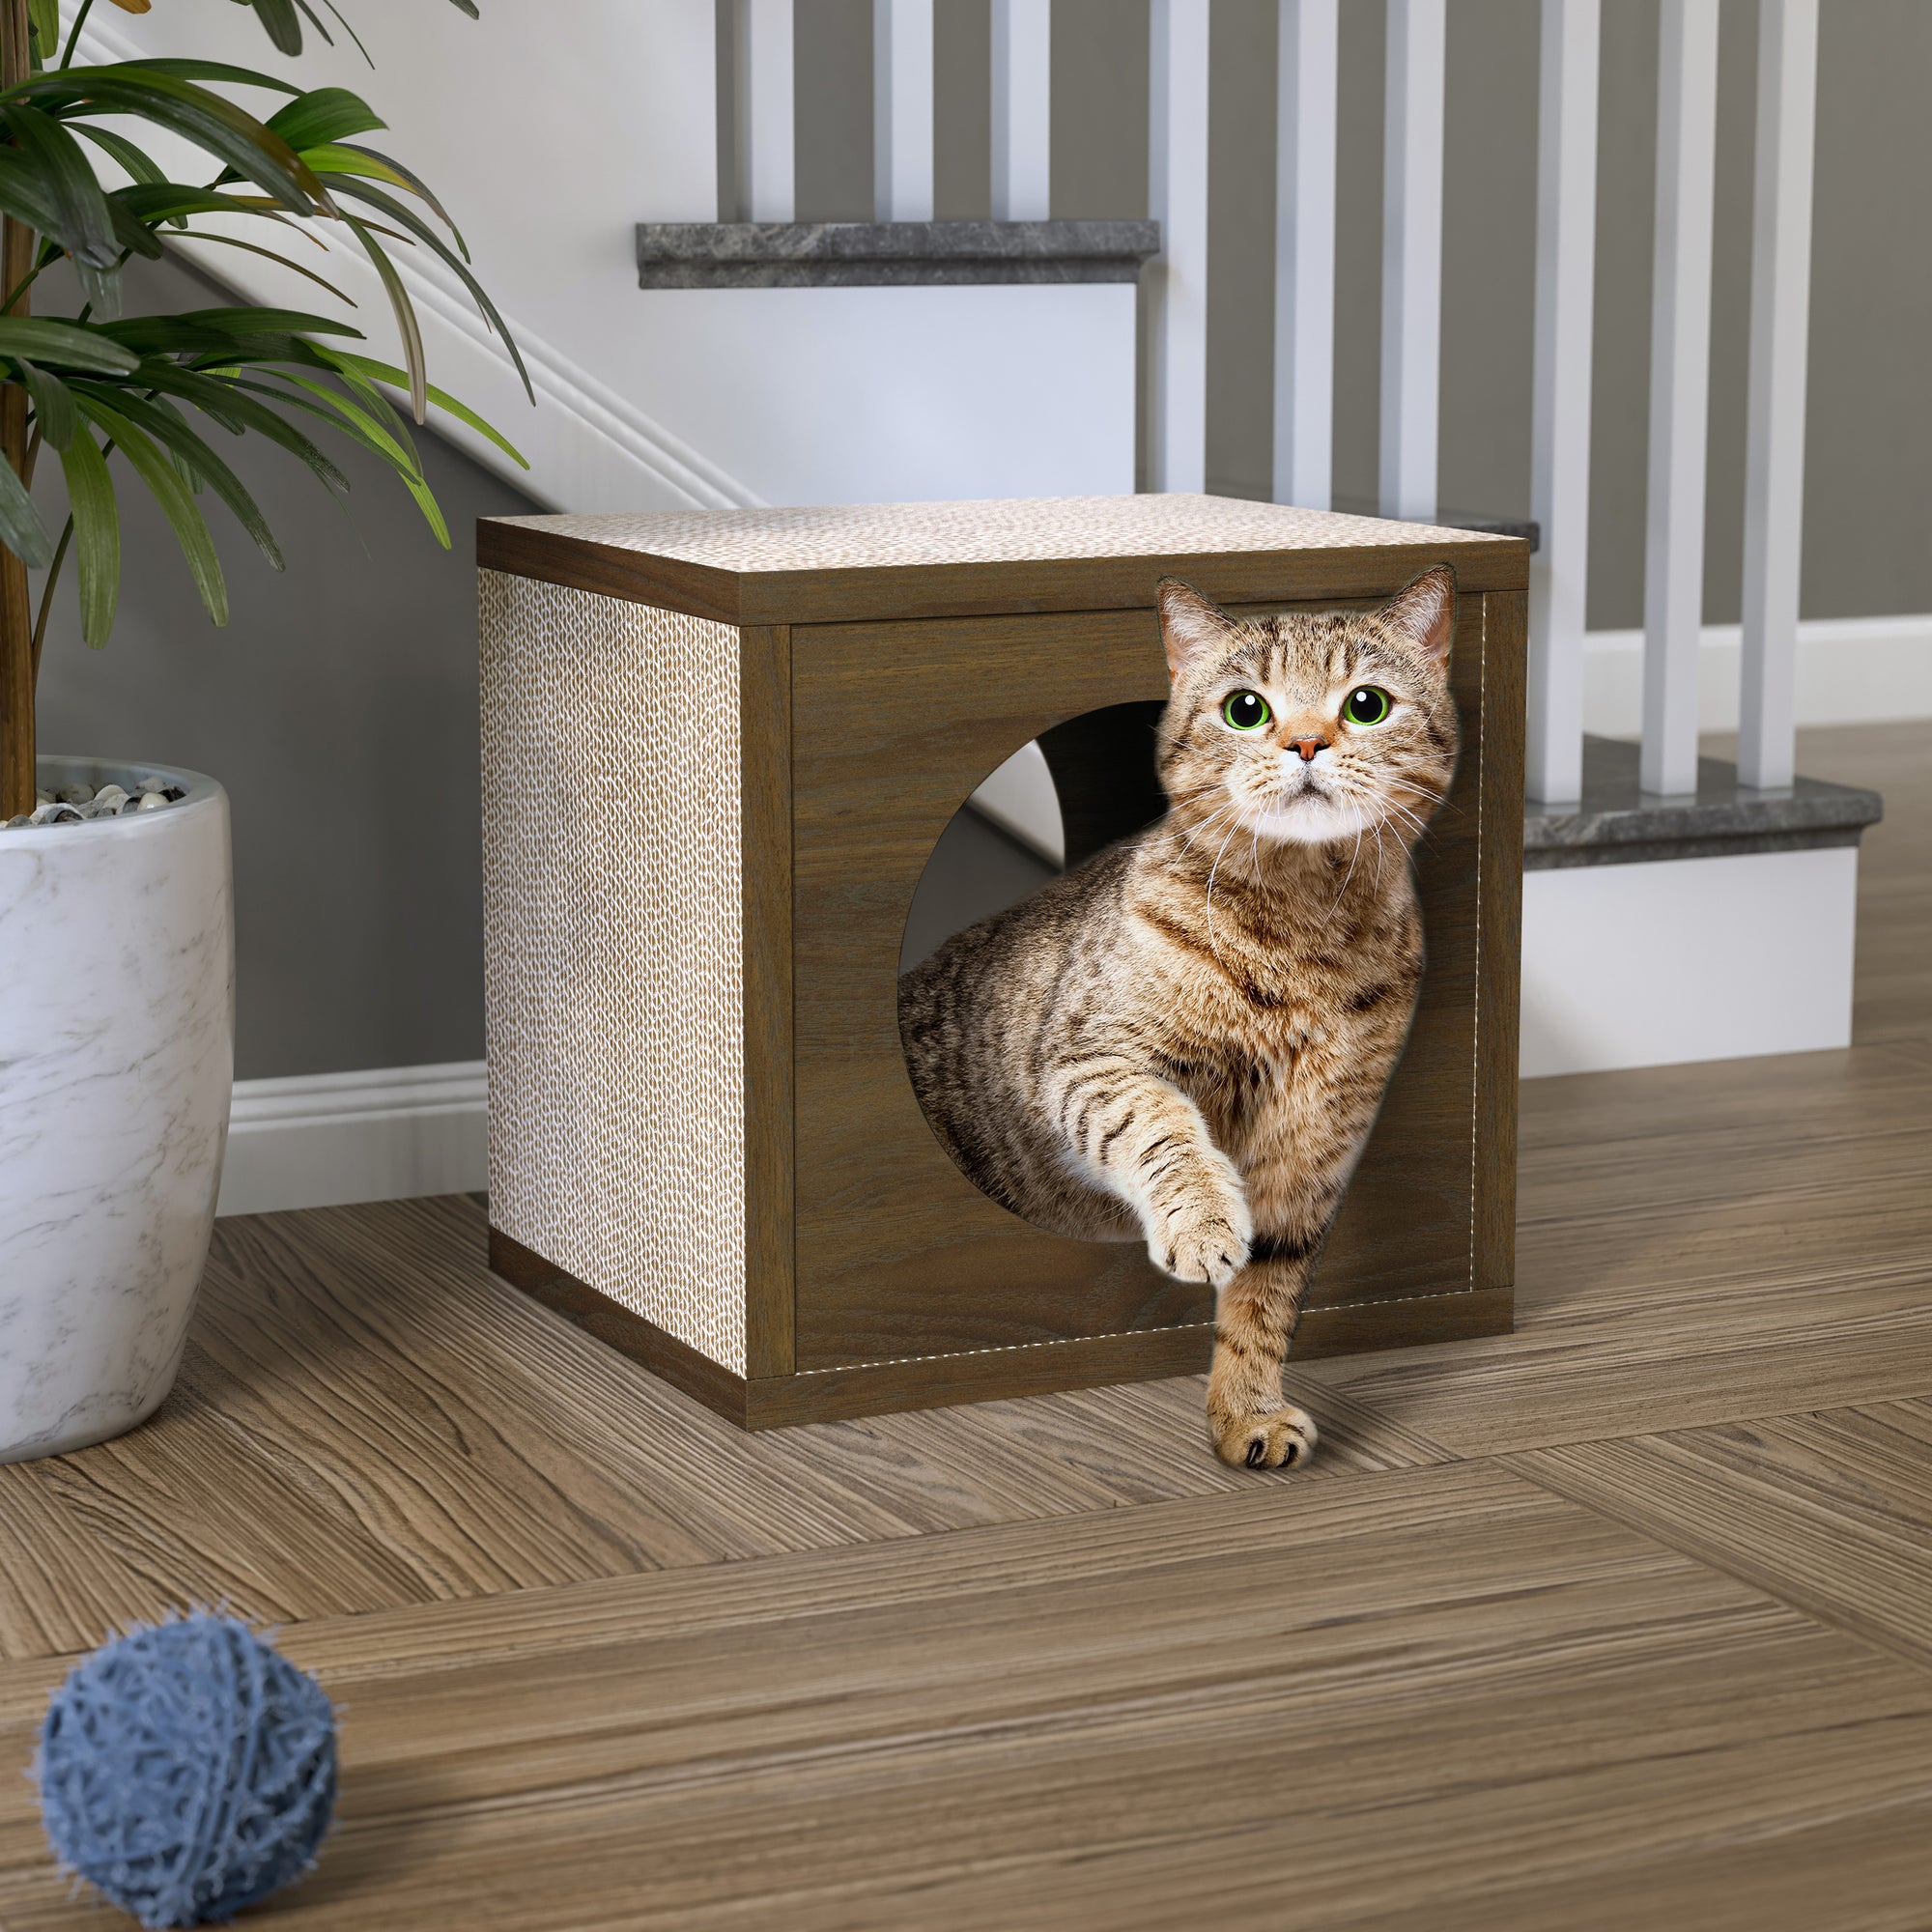 Katsquare Cube Scratching Post, Royal Walnut (New Color)